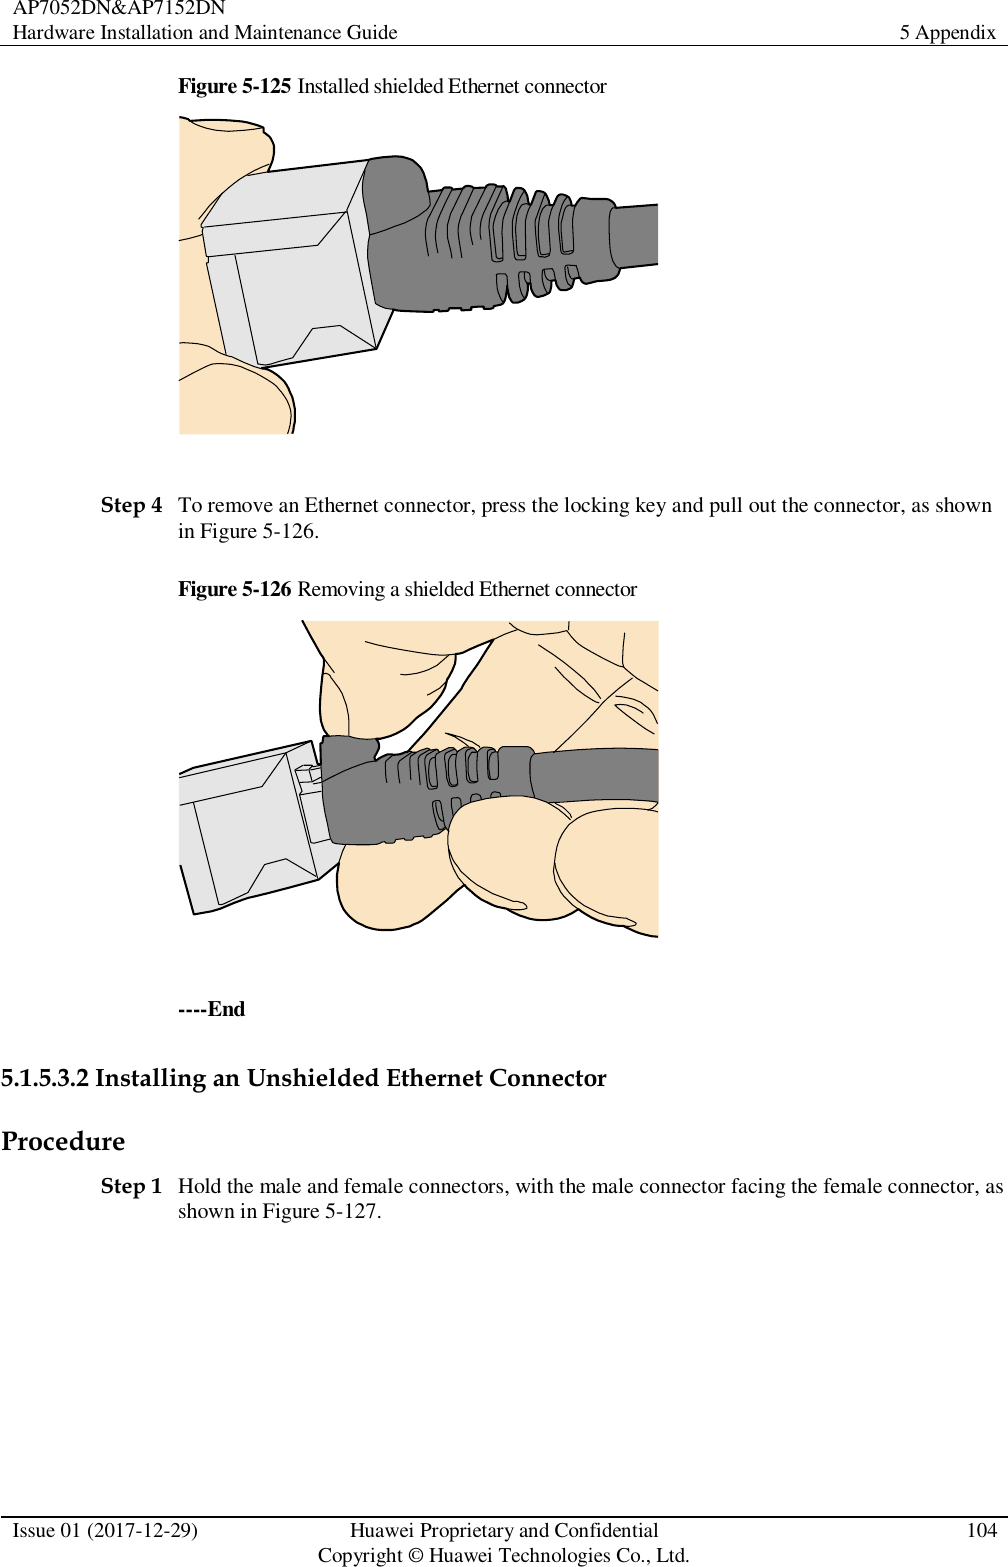 AP7052DN&amp;AP7152DN Hardware Installation and Maintenance Guide 5 Appendix  Issue 01 (2017-12-29) Huawei Proprietary and Confidential                                     Copyright © Huawei Technologies Co., Ltd. 104  Figure 5-125 Installed shielded Ethernet connector   Step 4 To remove an Ethernet connector, press the locking key and pull out the connector, as shown in Figure 5-126. Figure 5-126 Removing a shielded Ethernet connector   ----End 5.1.5.3.2 Installing an Unshielded Ethernet Connector Procedure Step 1 Hold the male and female connectors, with the male connector facing the female connector, as shown in Figure 5-127. 